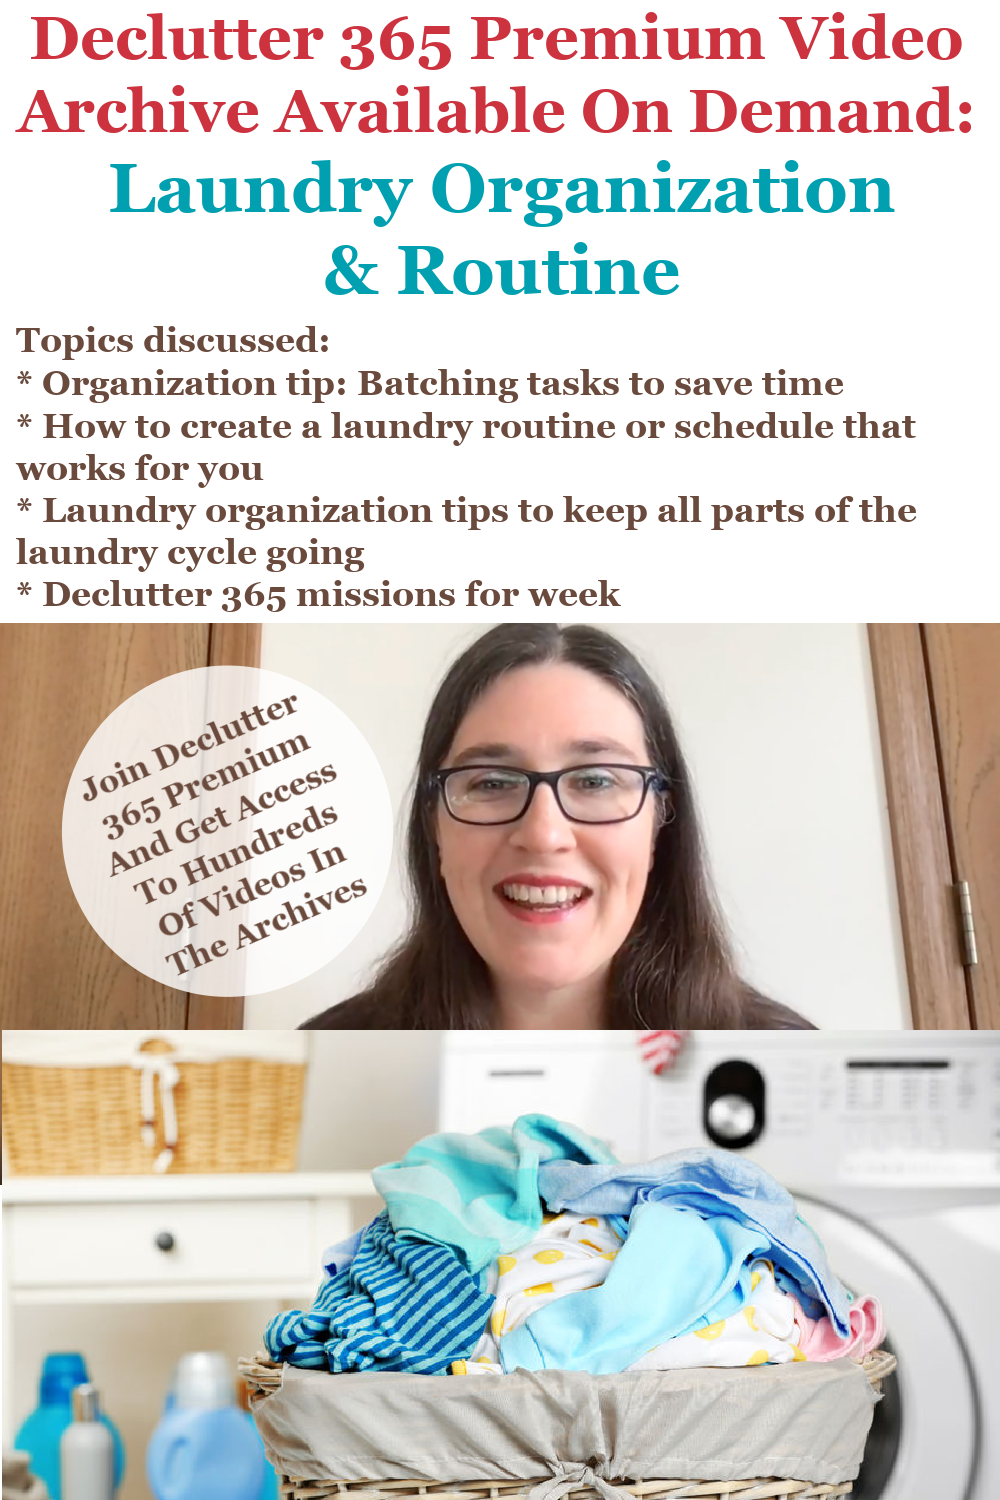 Declutter 365 Premium video archive available on demand all about organizing your laundry, and setting up a routine or schedule, on Home Storage Solutions 101